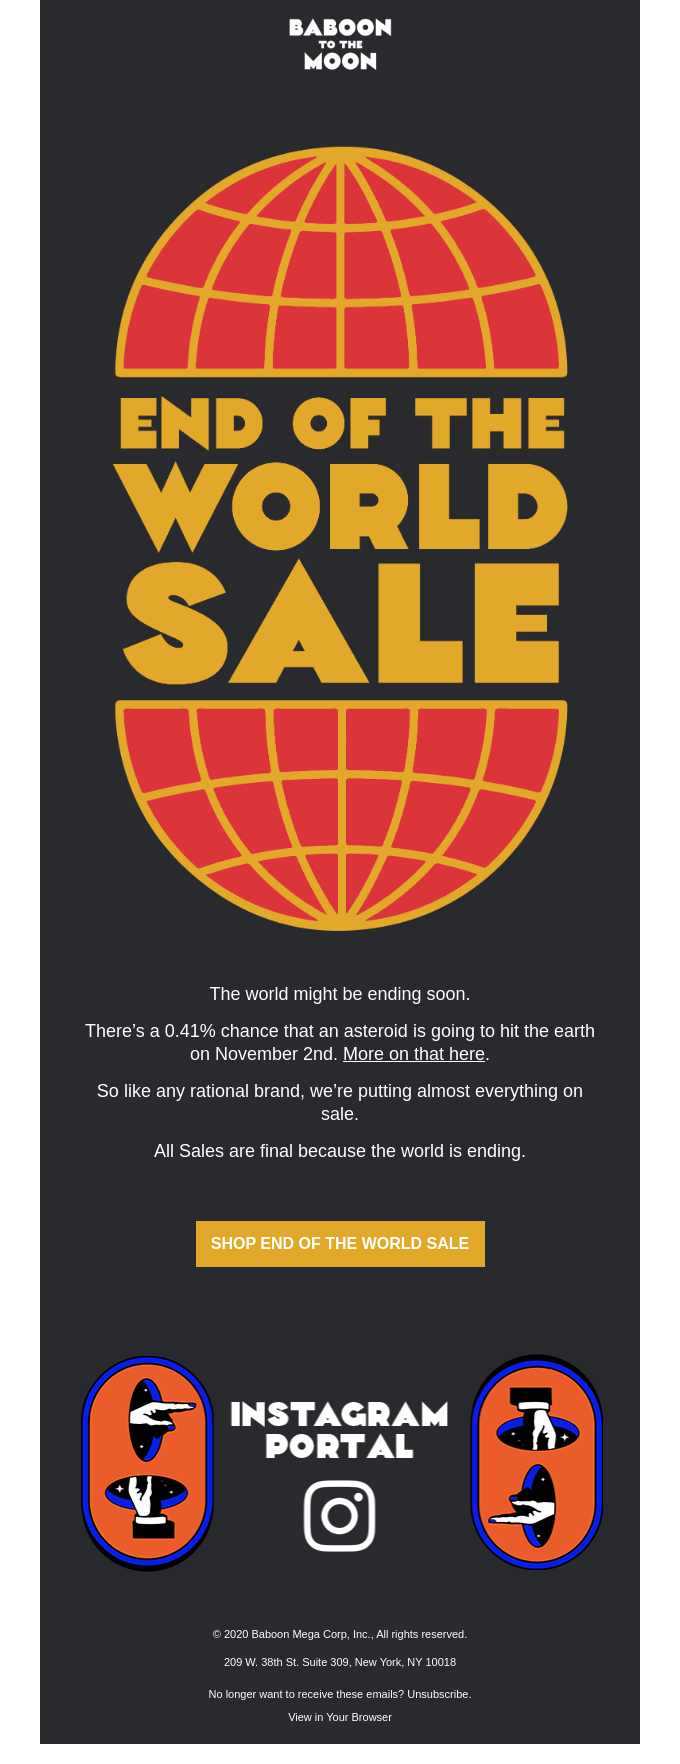 END OF THE WORLD SALE